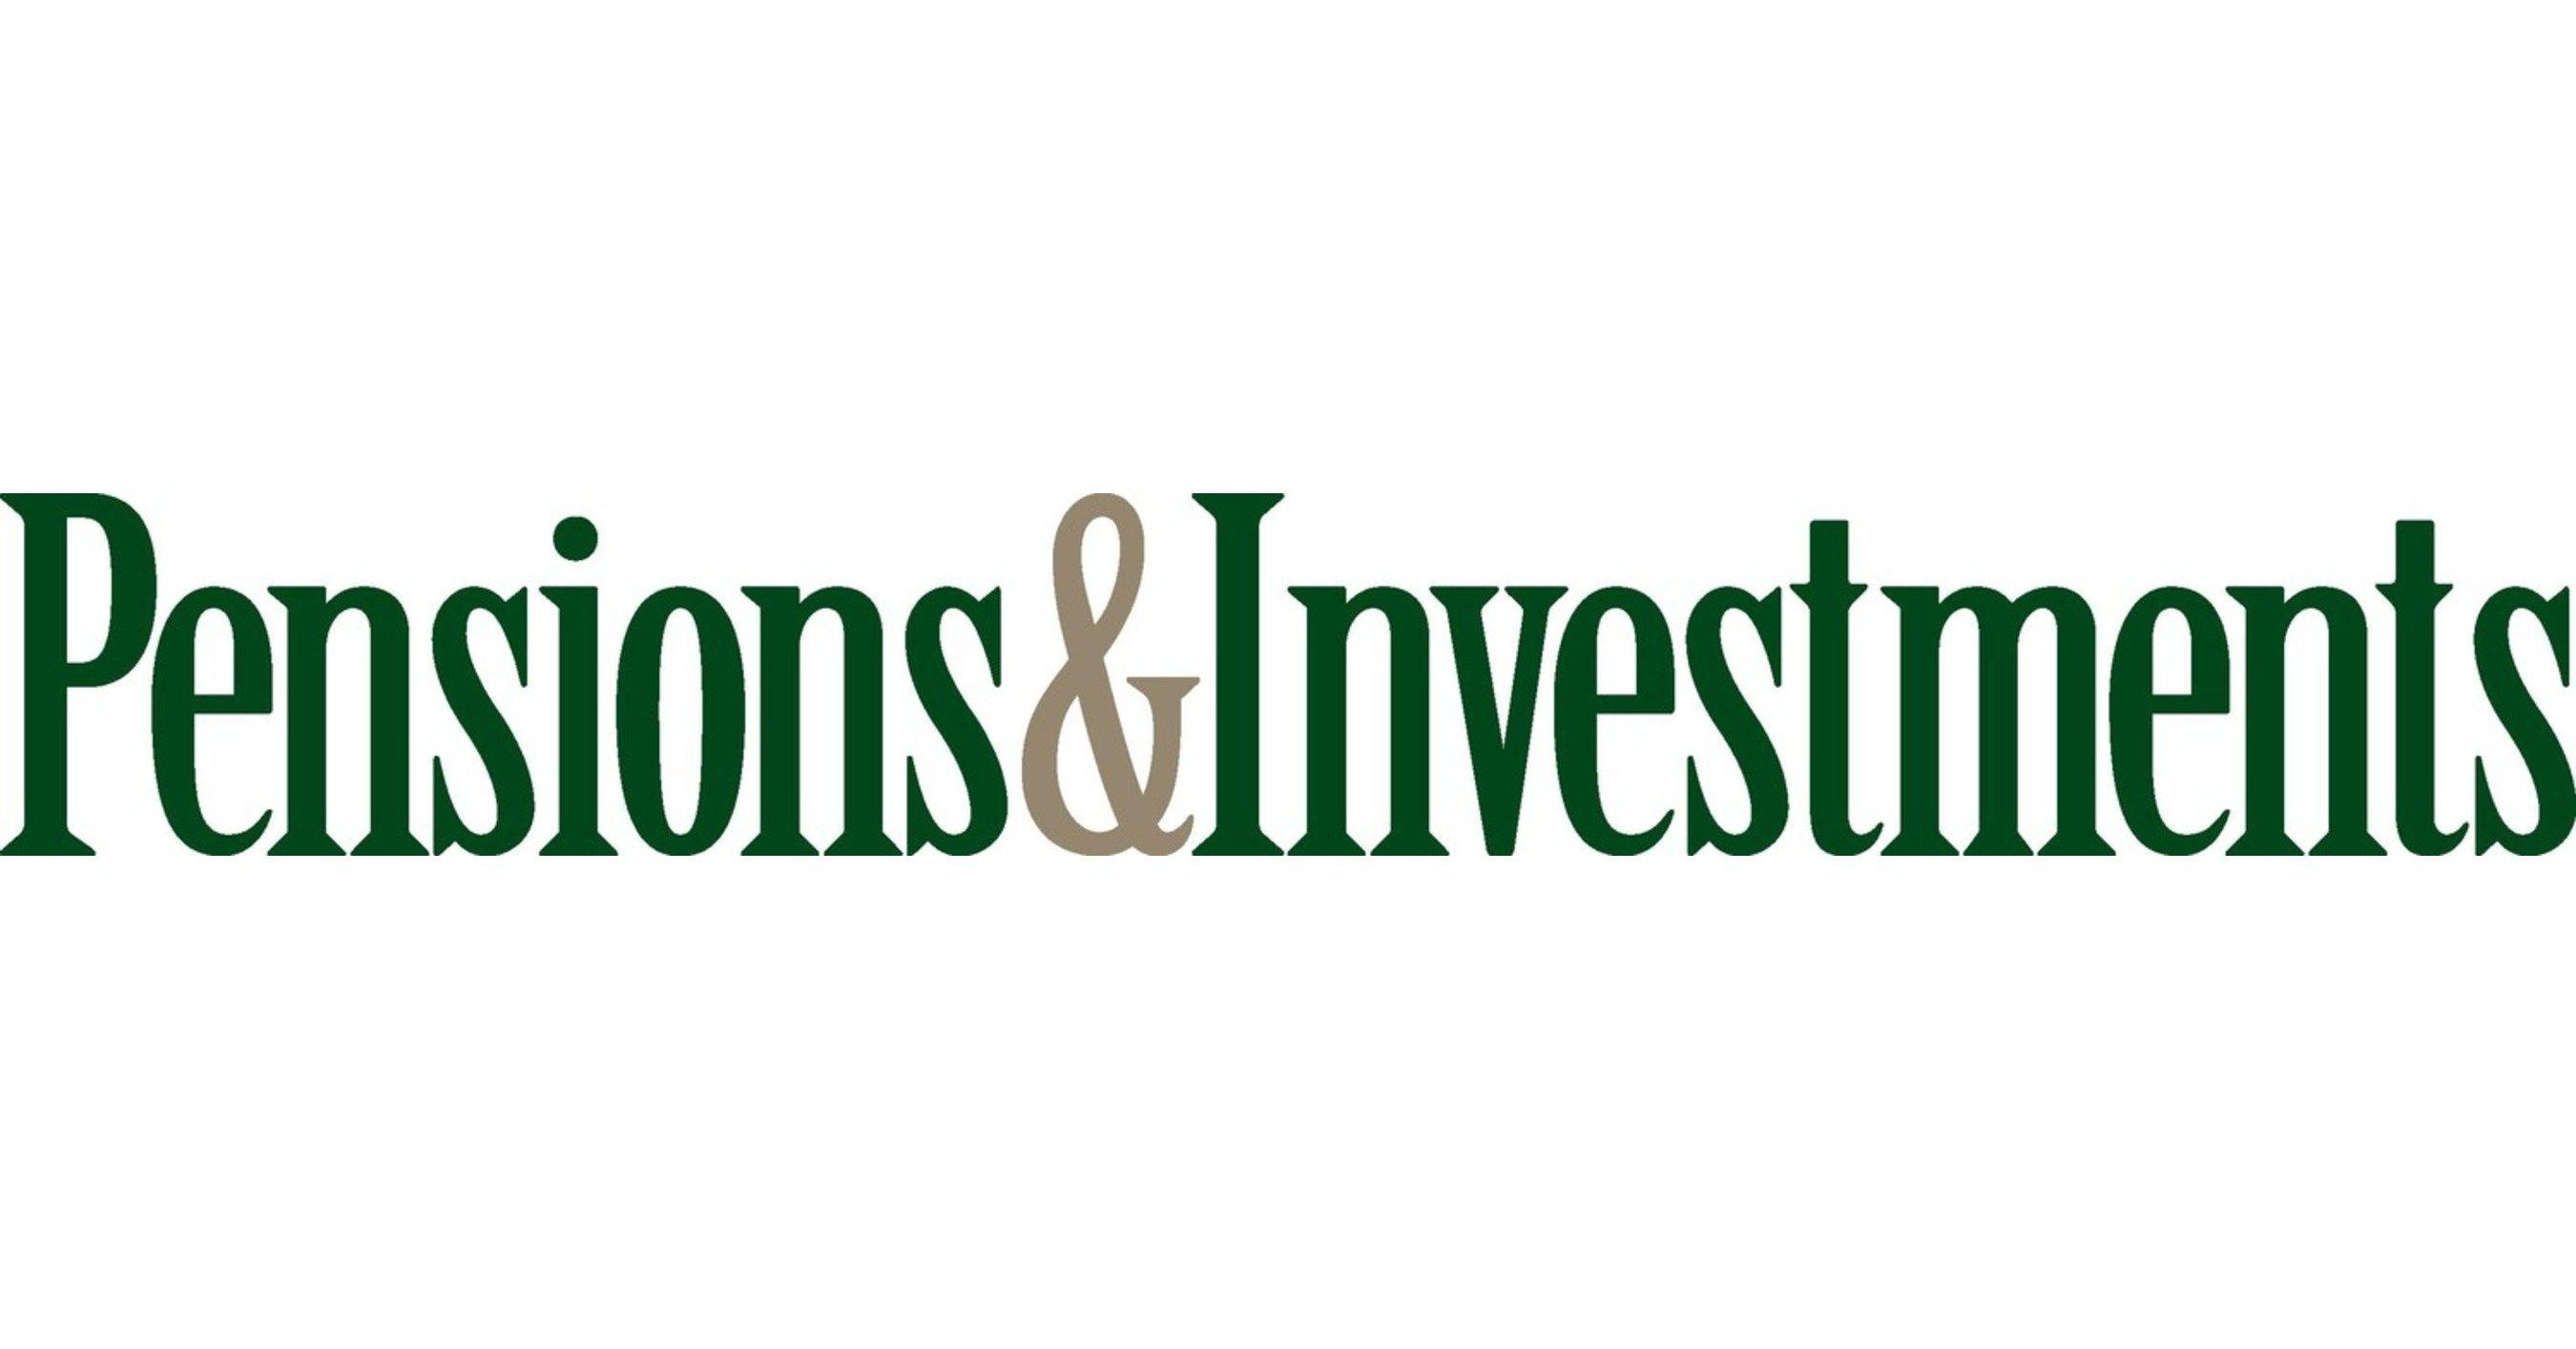 Pensions_and_Investments_Logo.jpg